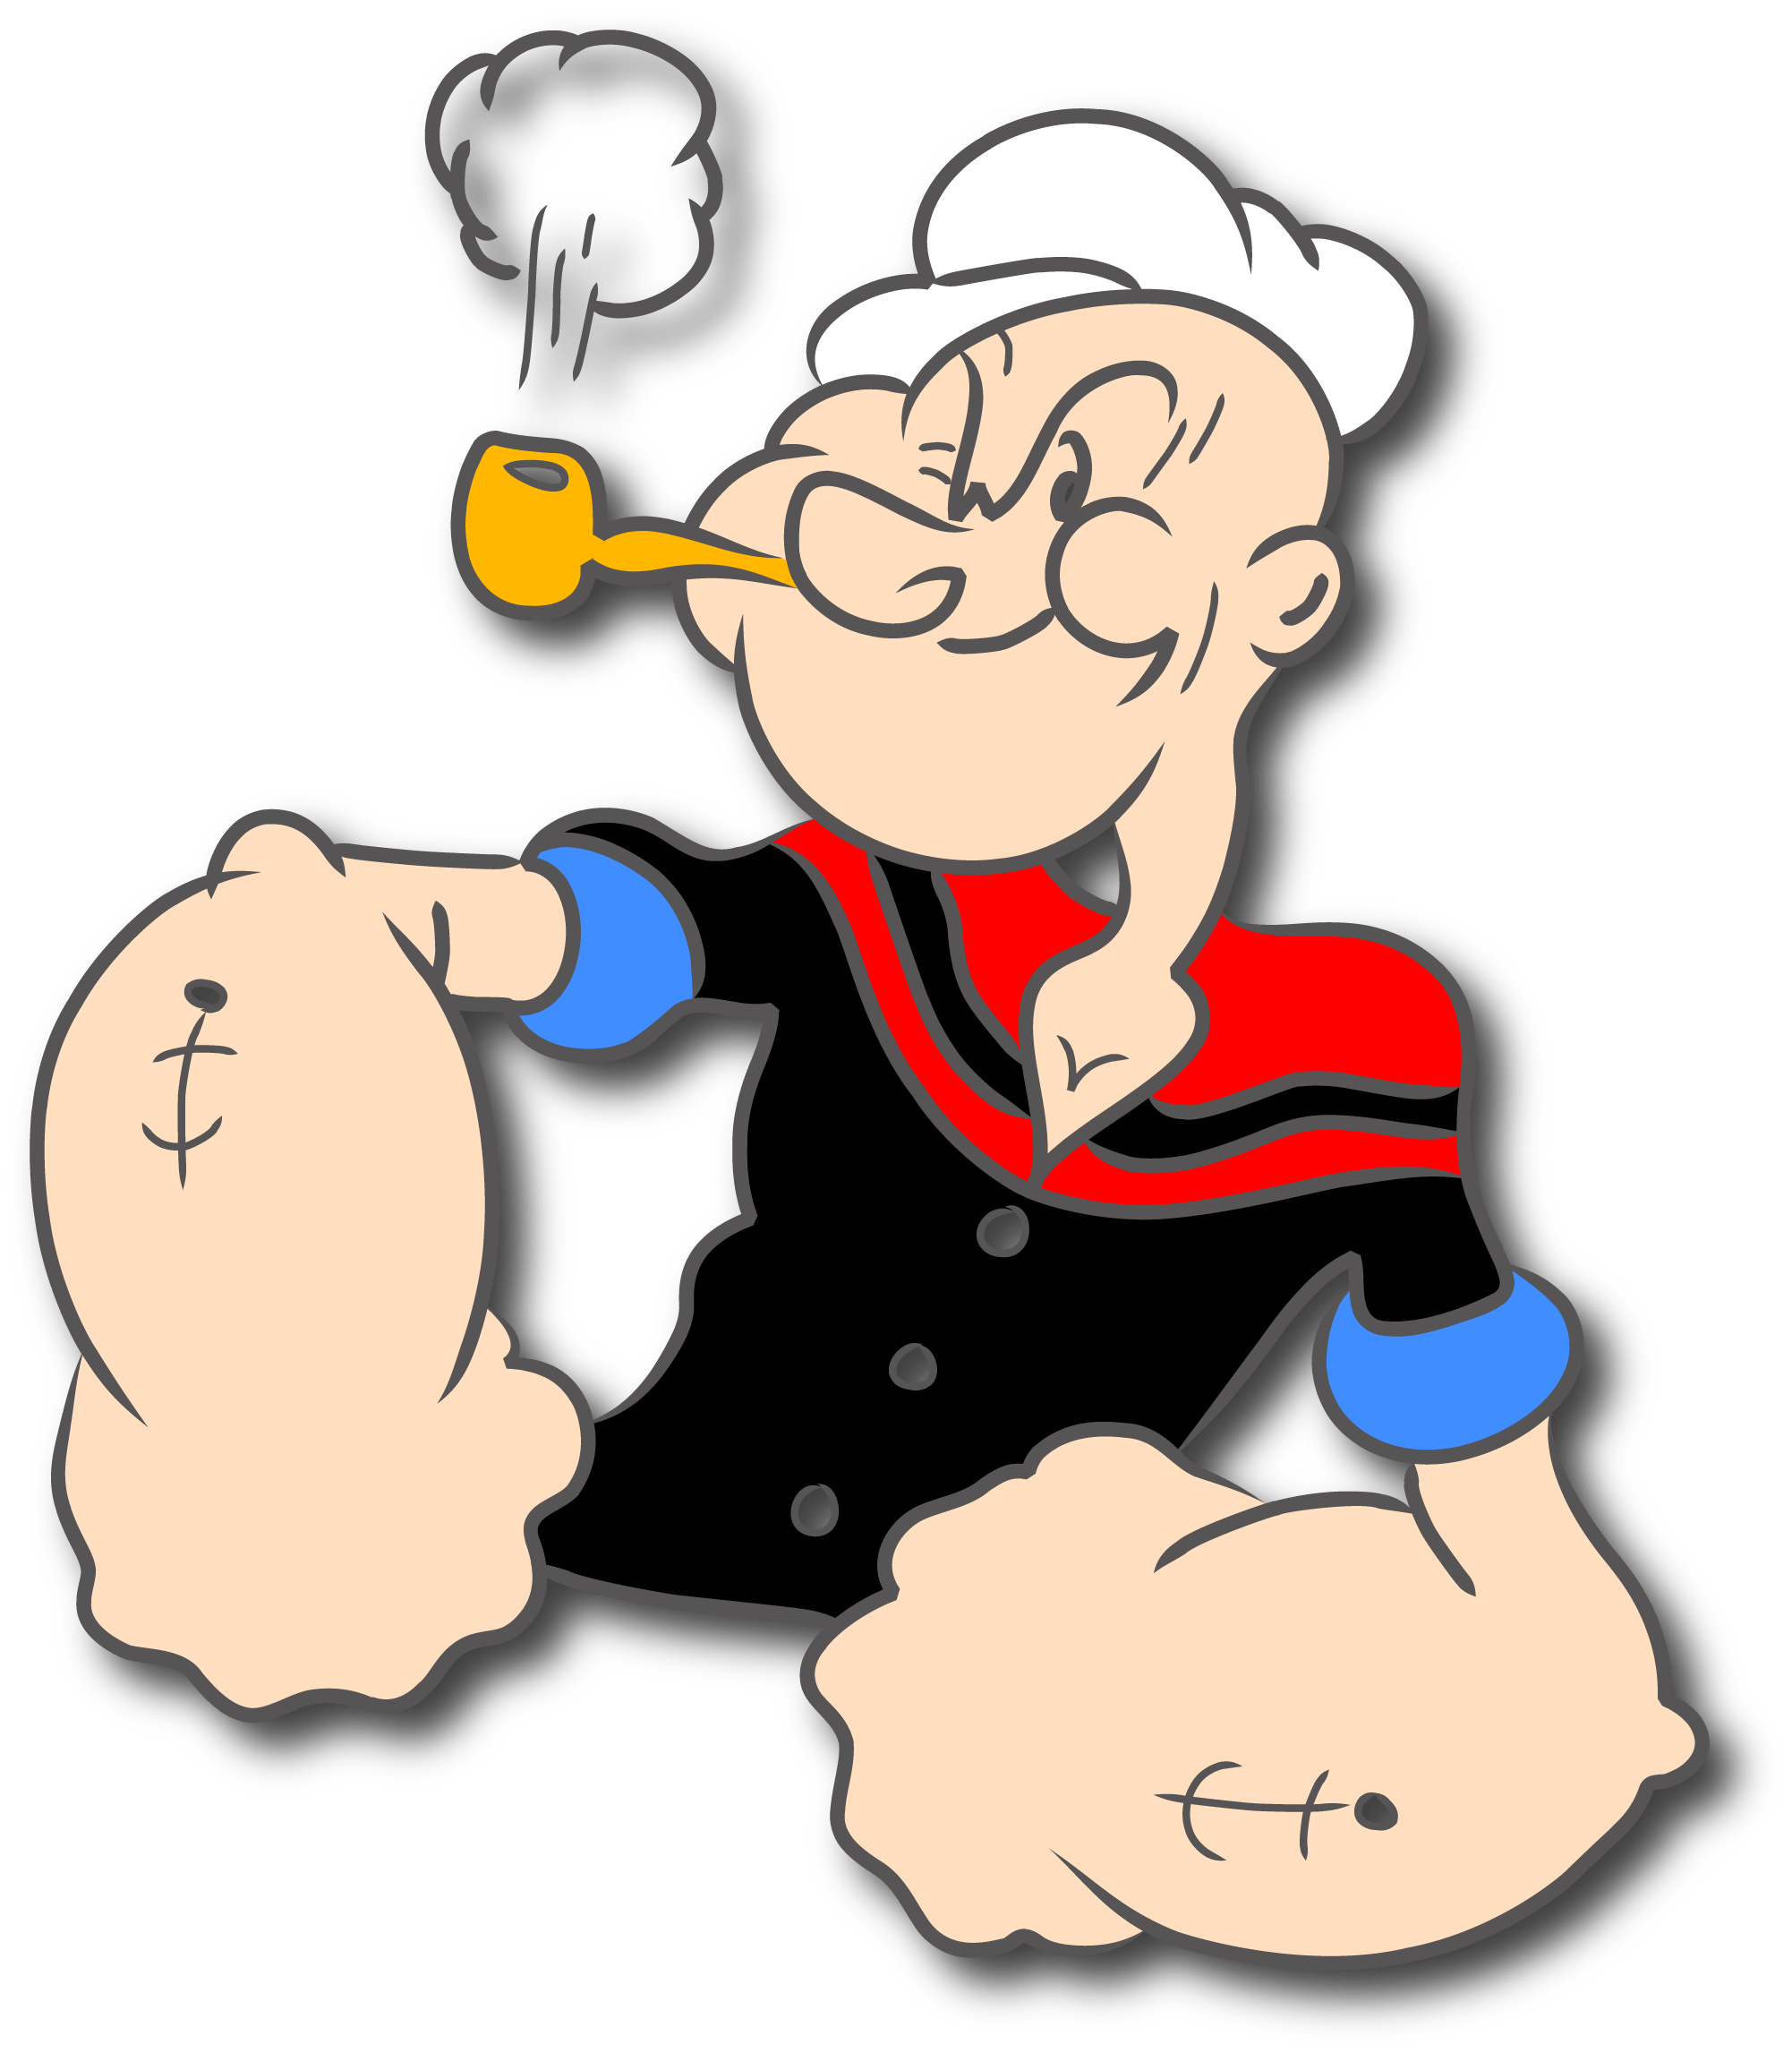 Pics Popeye Cartoon For Computer Image Wallpaper Download « Anime